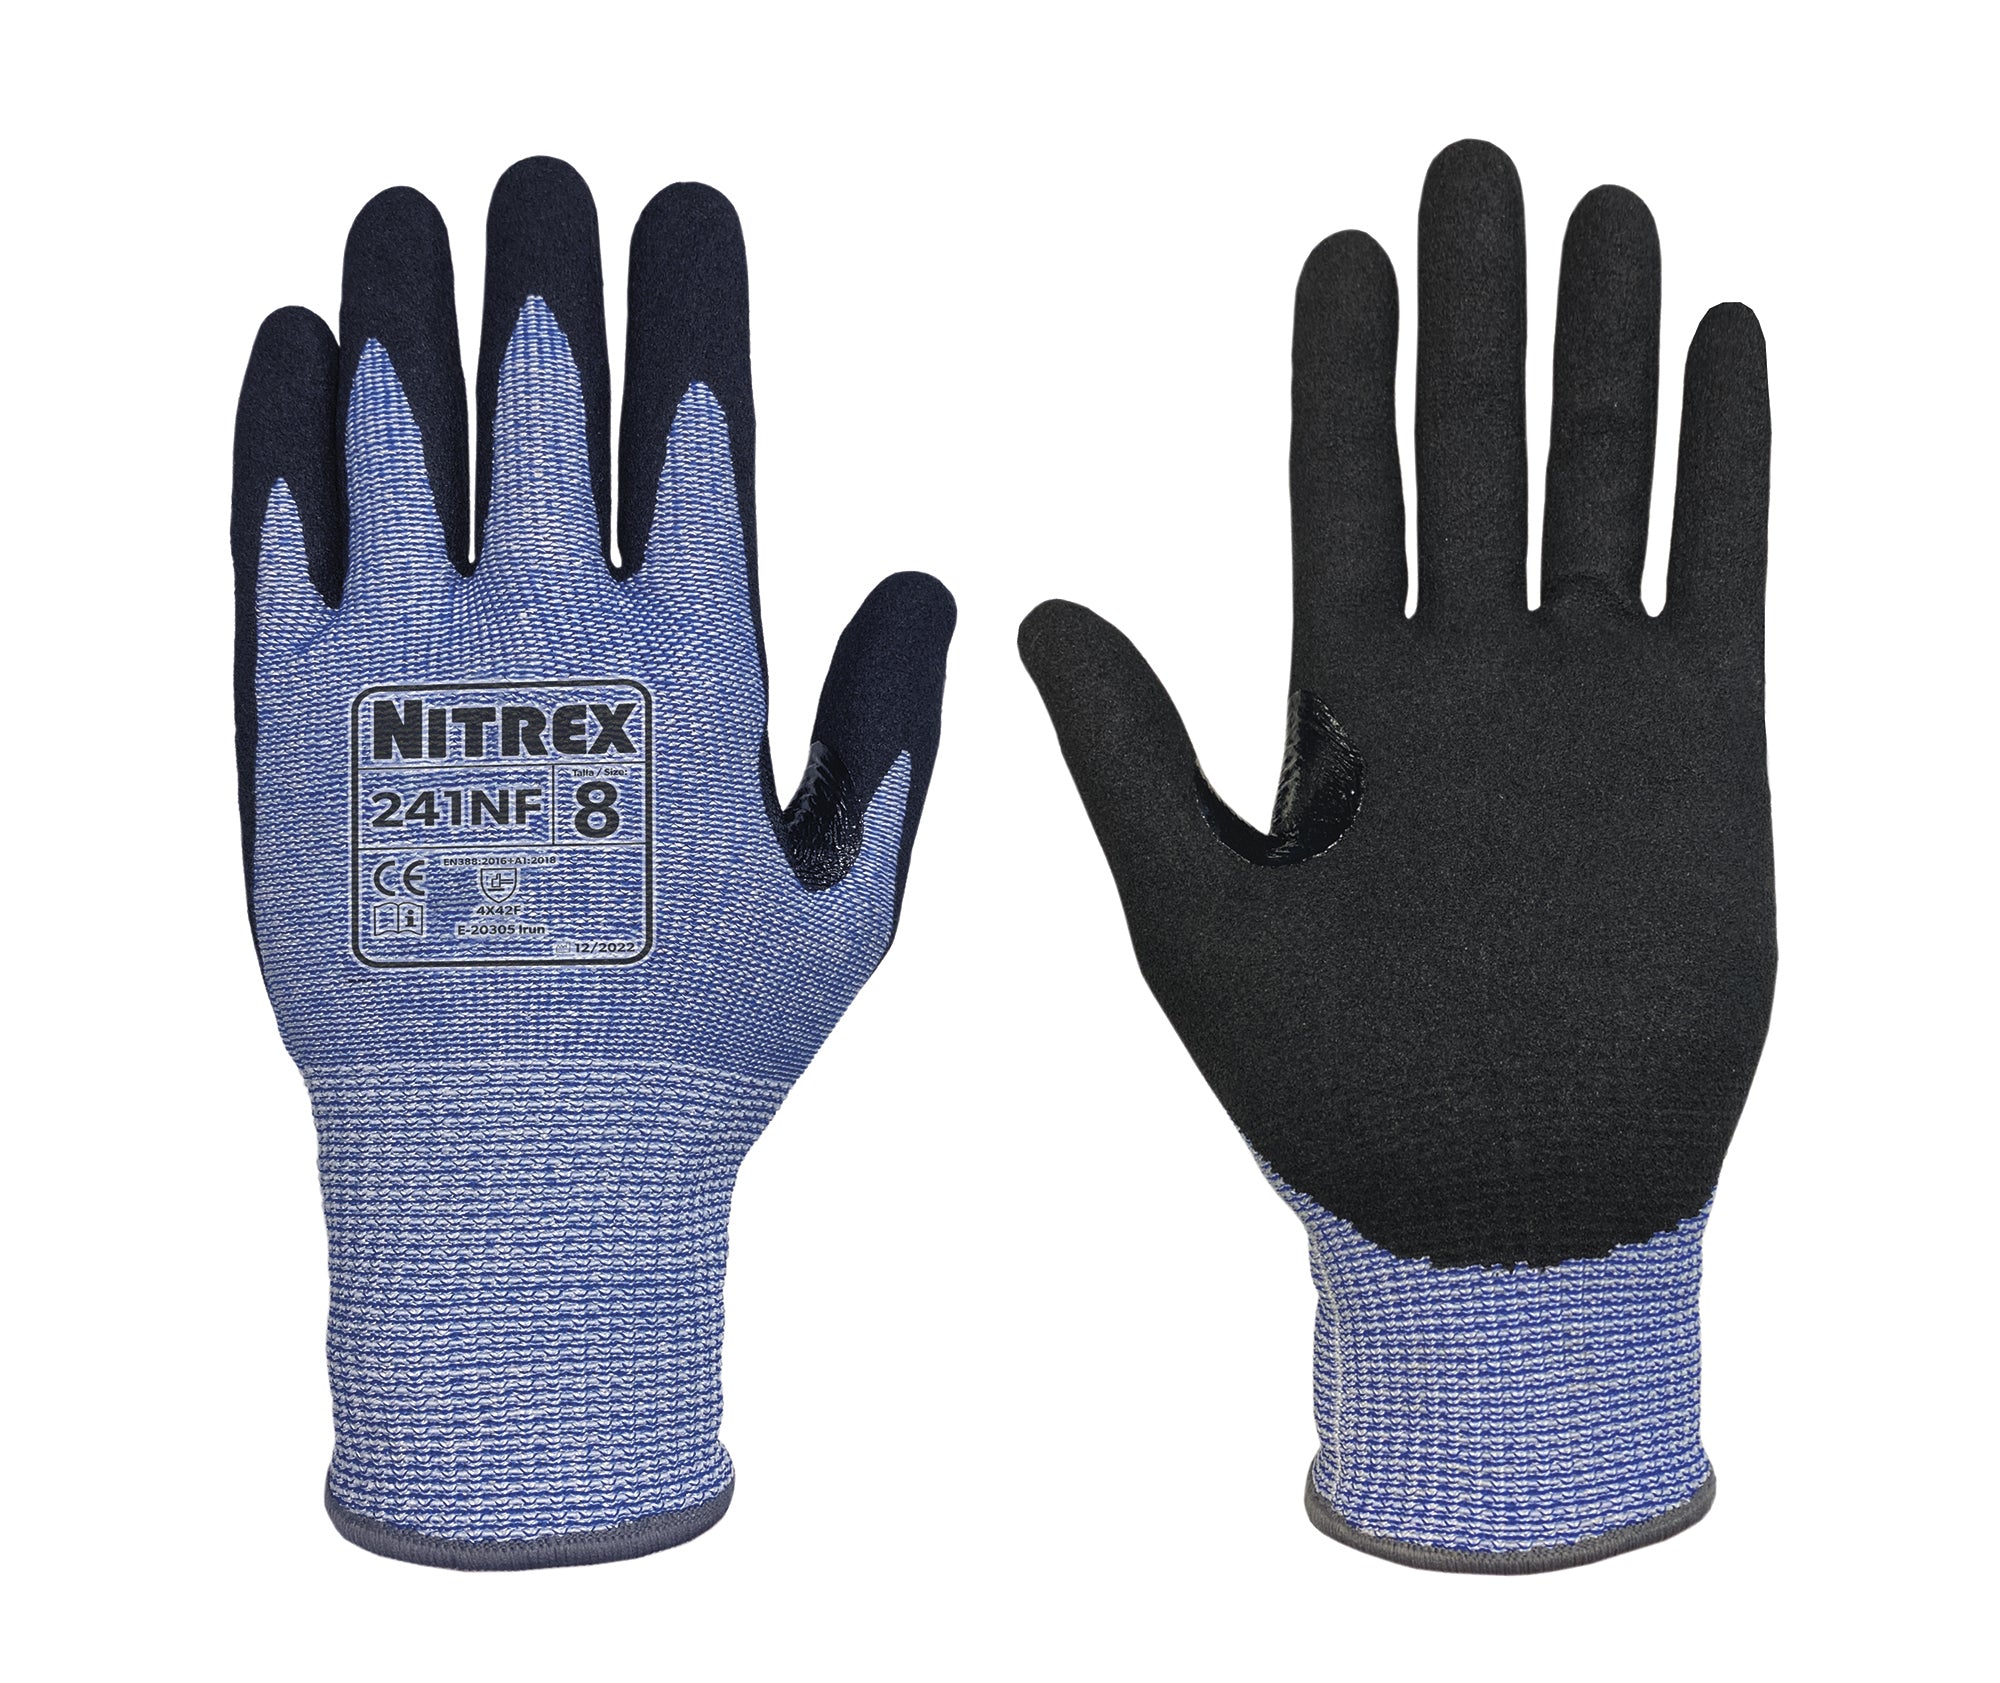 Cut Resistant Gloves by Unigloves